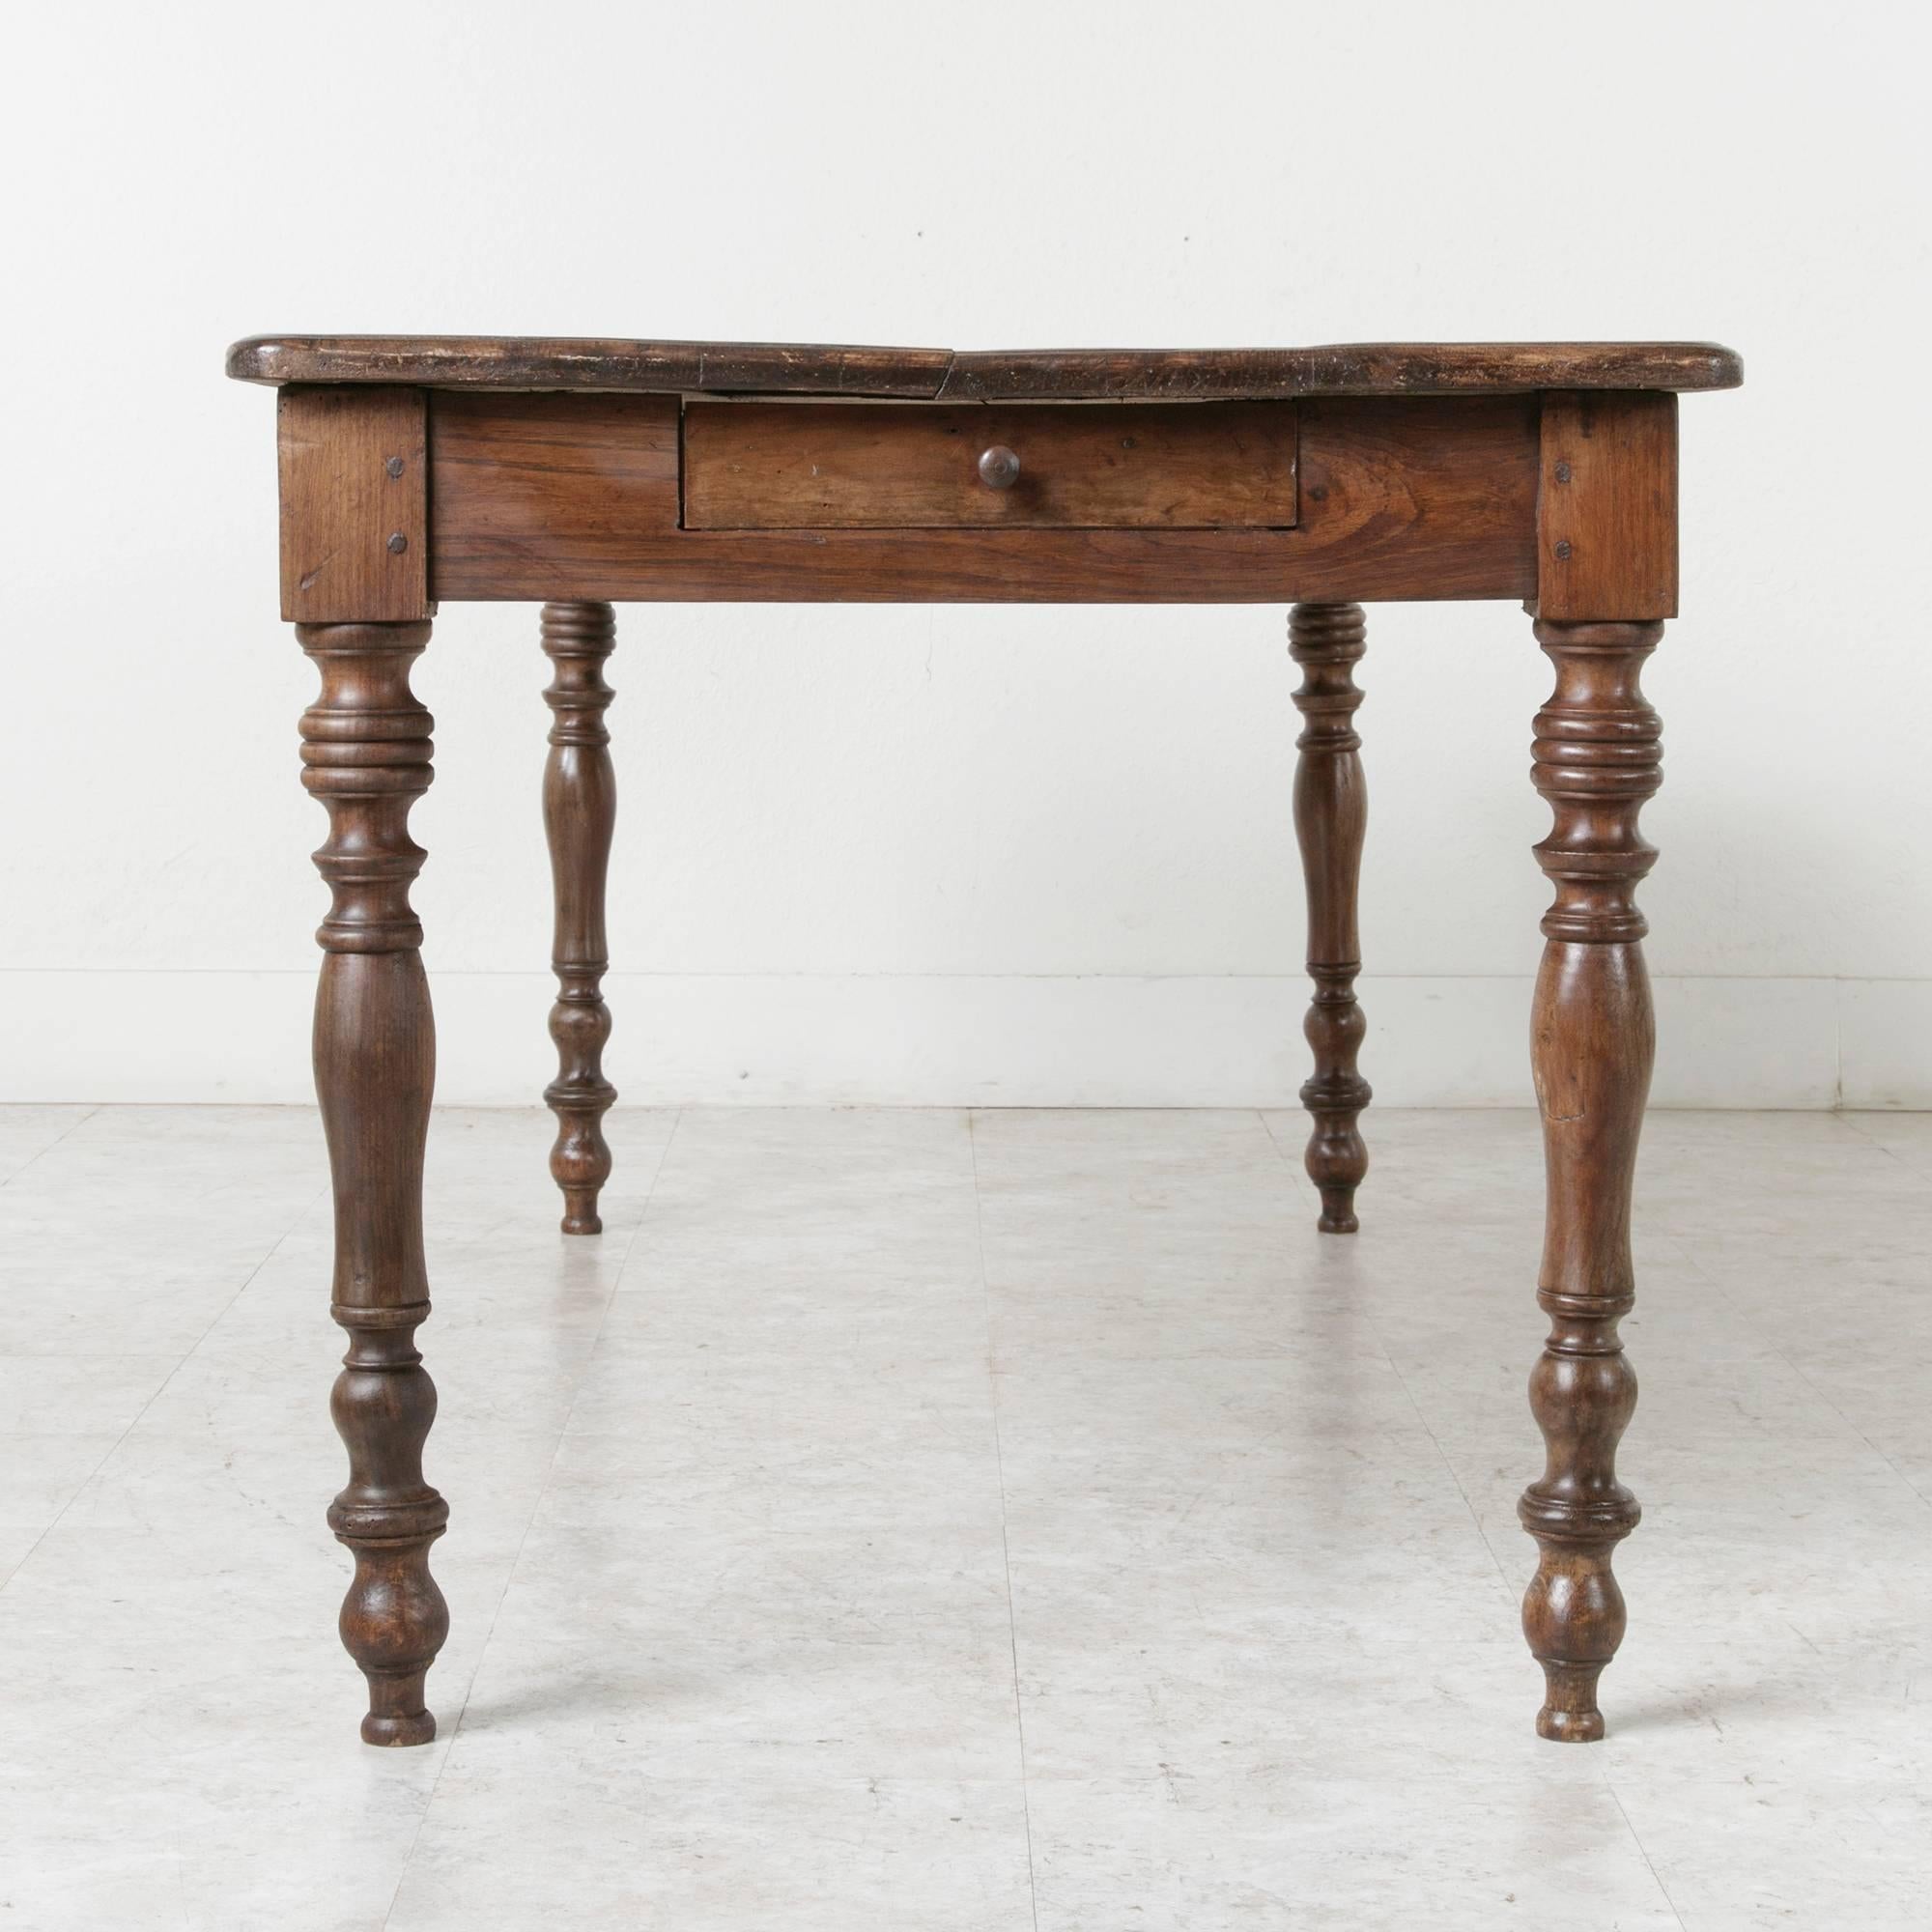 20th Century Antique French Hand Pegged Oak Dining Farm Table with Turned Legs and Drawers